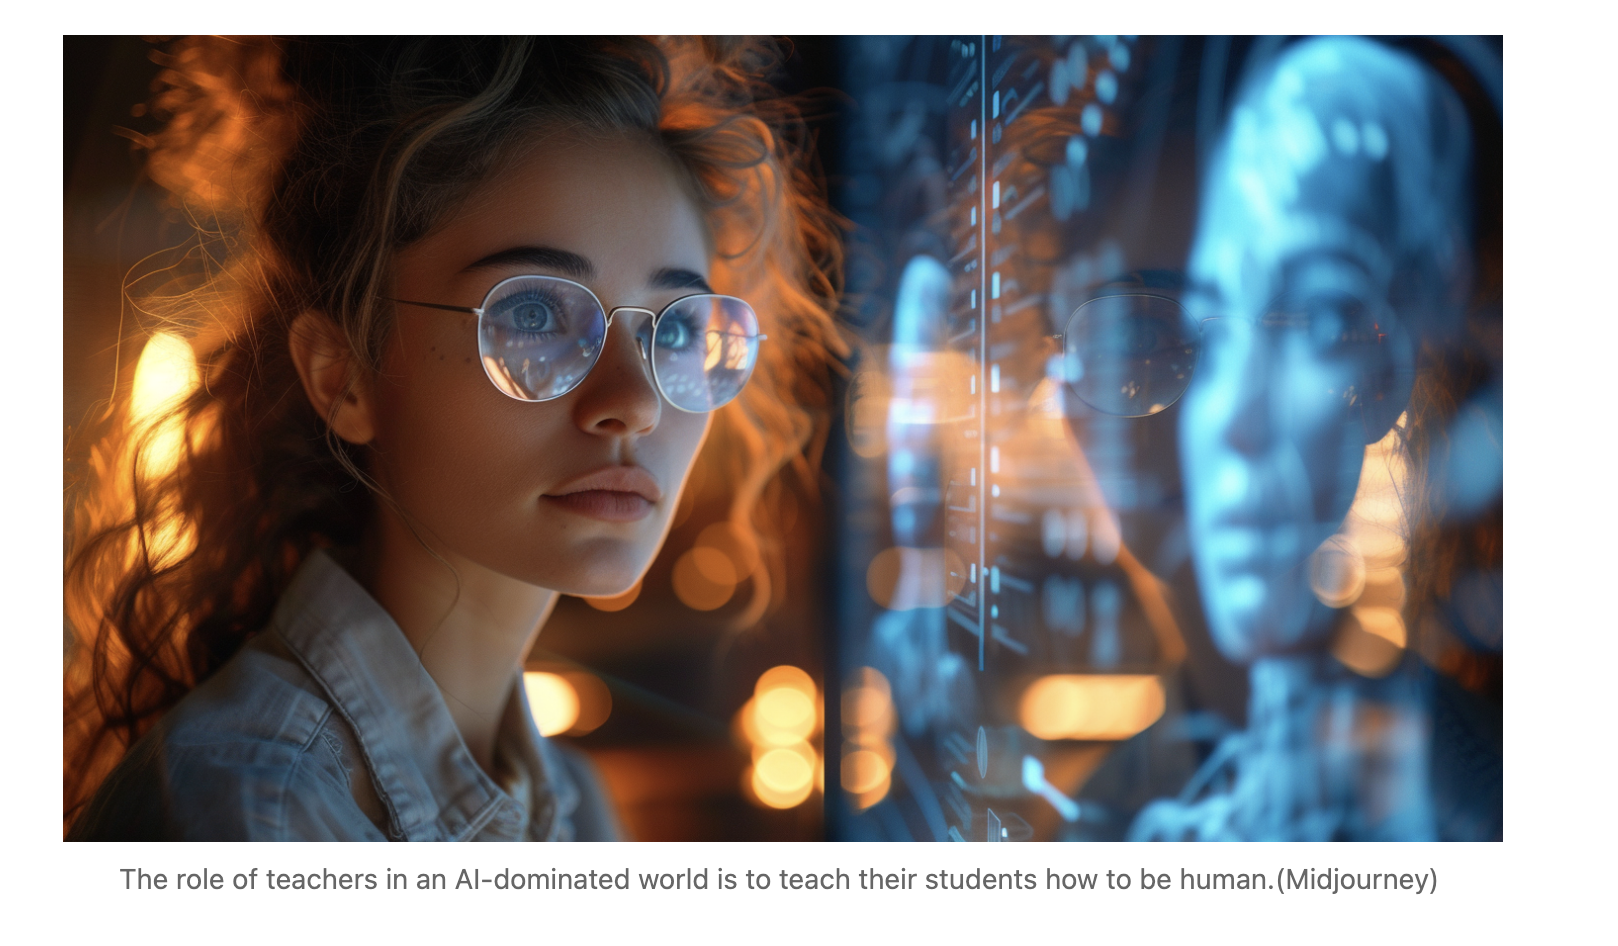 The_role_of_teachers_in_an_AI-dominated_world_is_to_teach_their_students_how_to_be_human.png